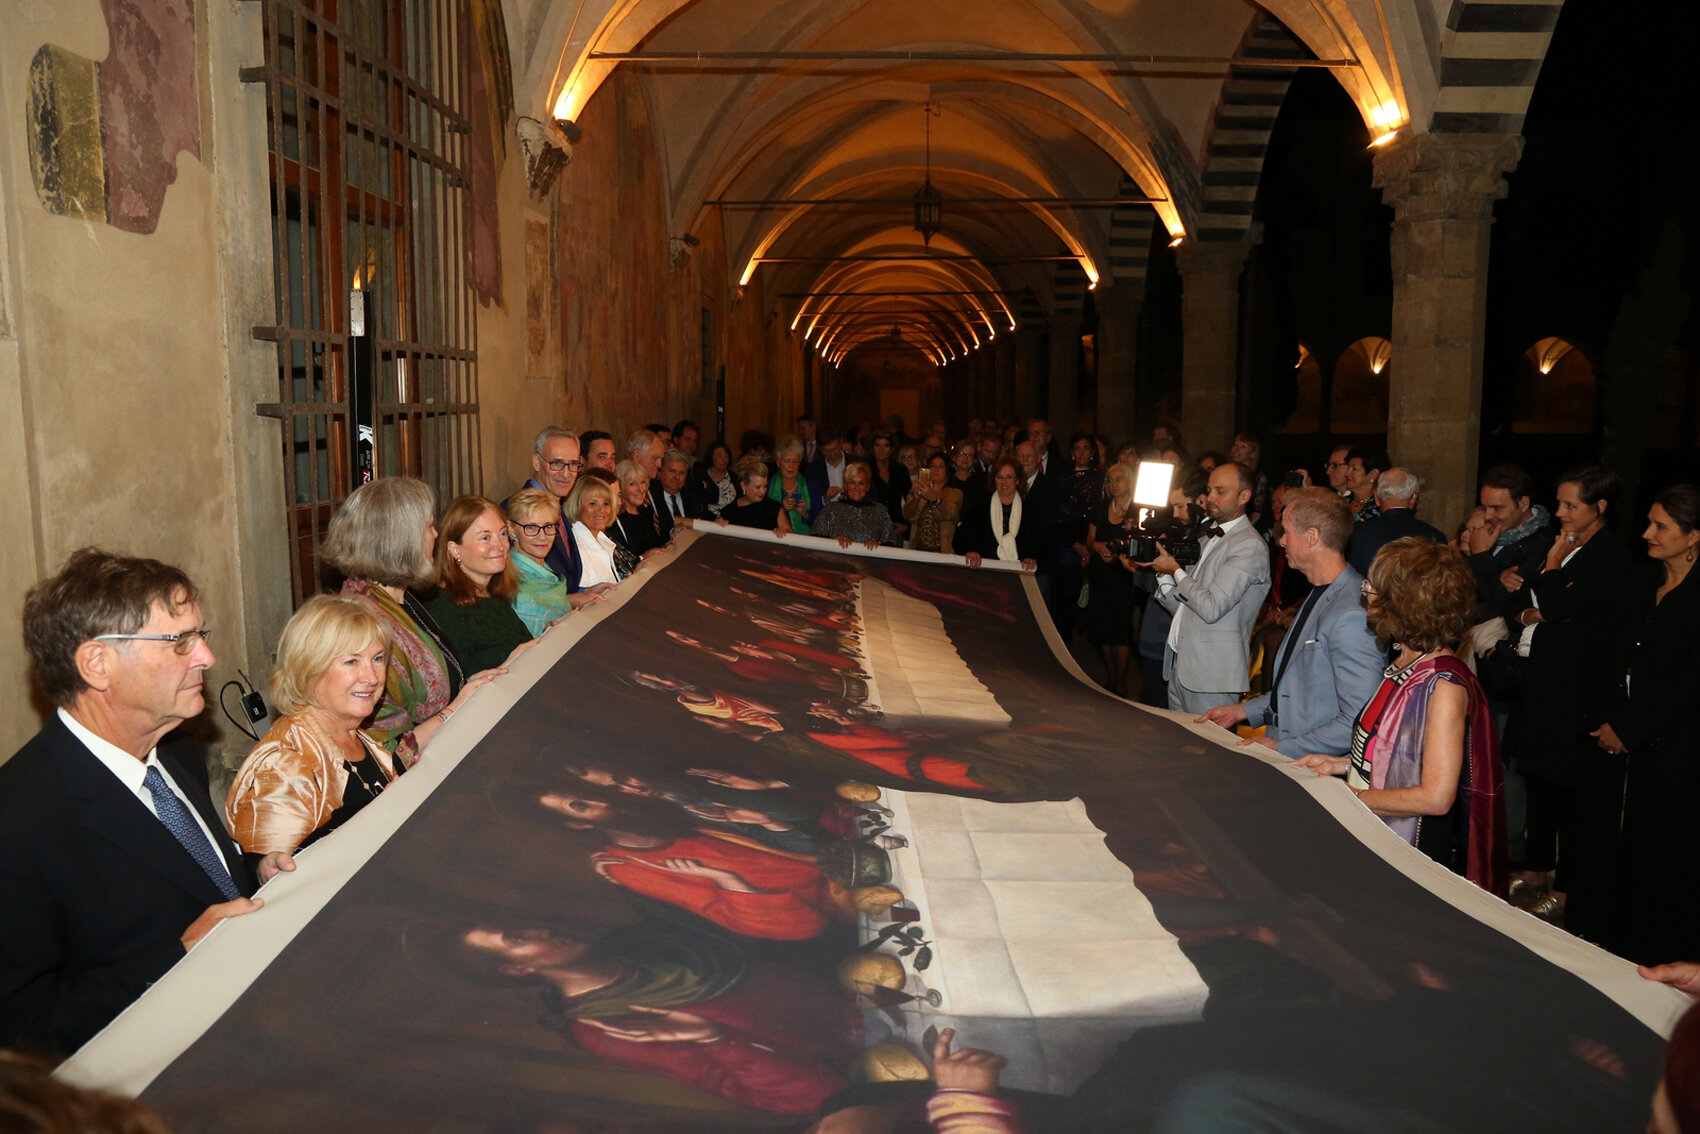  AWA patrons at the Cloister of Santa Maria Novella celebrate the unveiling of Nelli’s Last Supper by unrolling the ‘life-size’ replica, as a gift to the Dominican Community. (Ph. S. Silvia) 